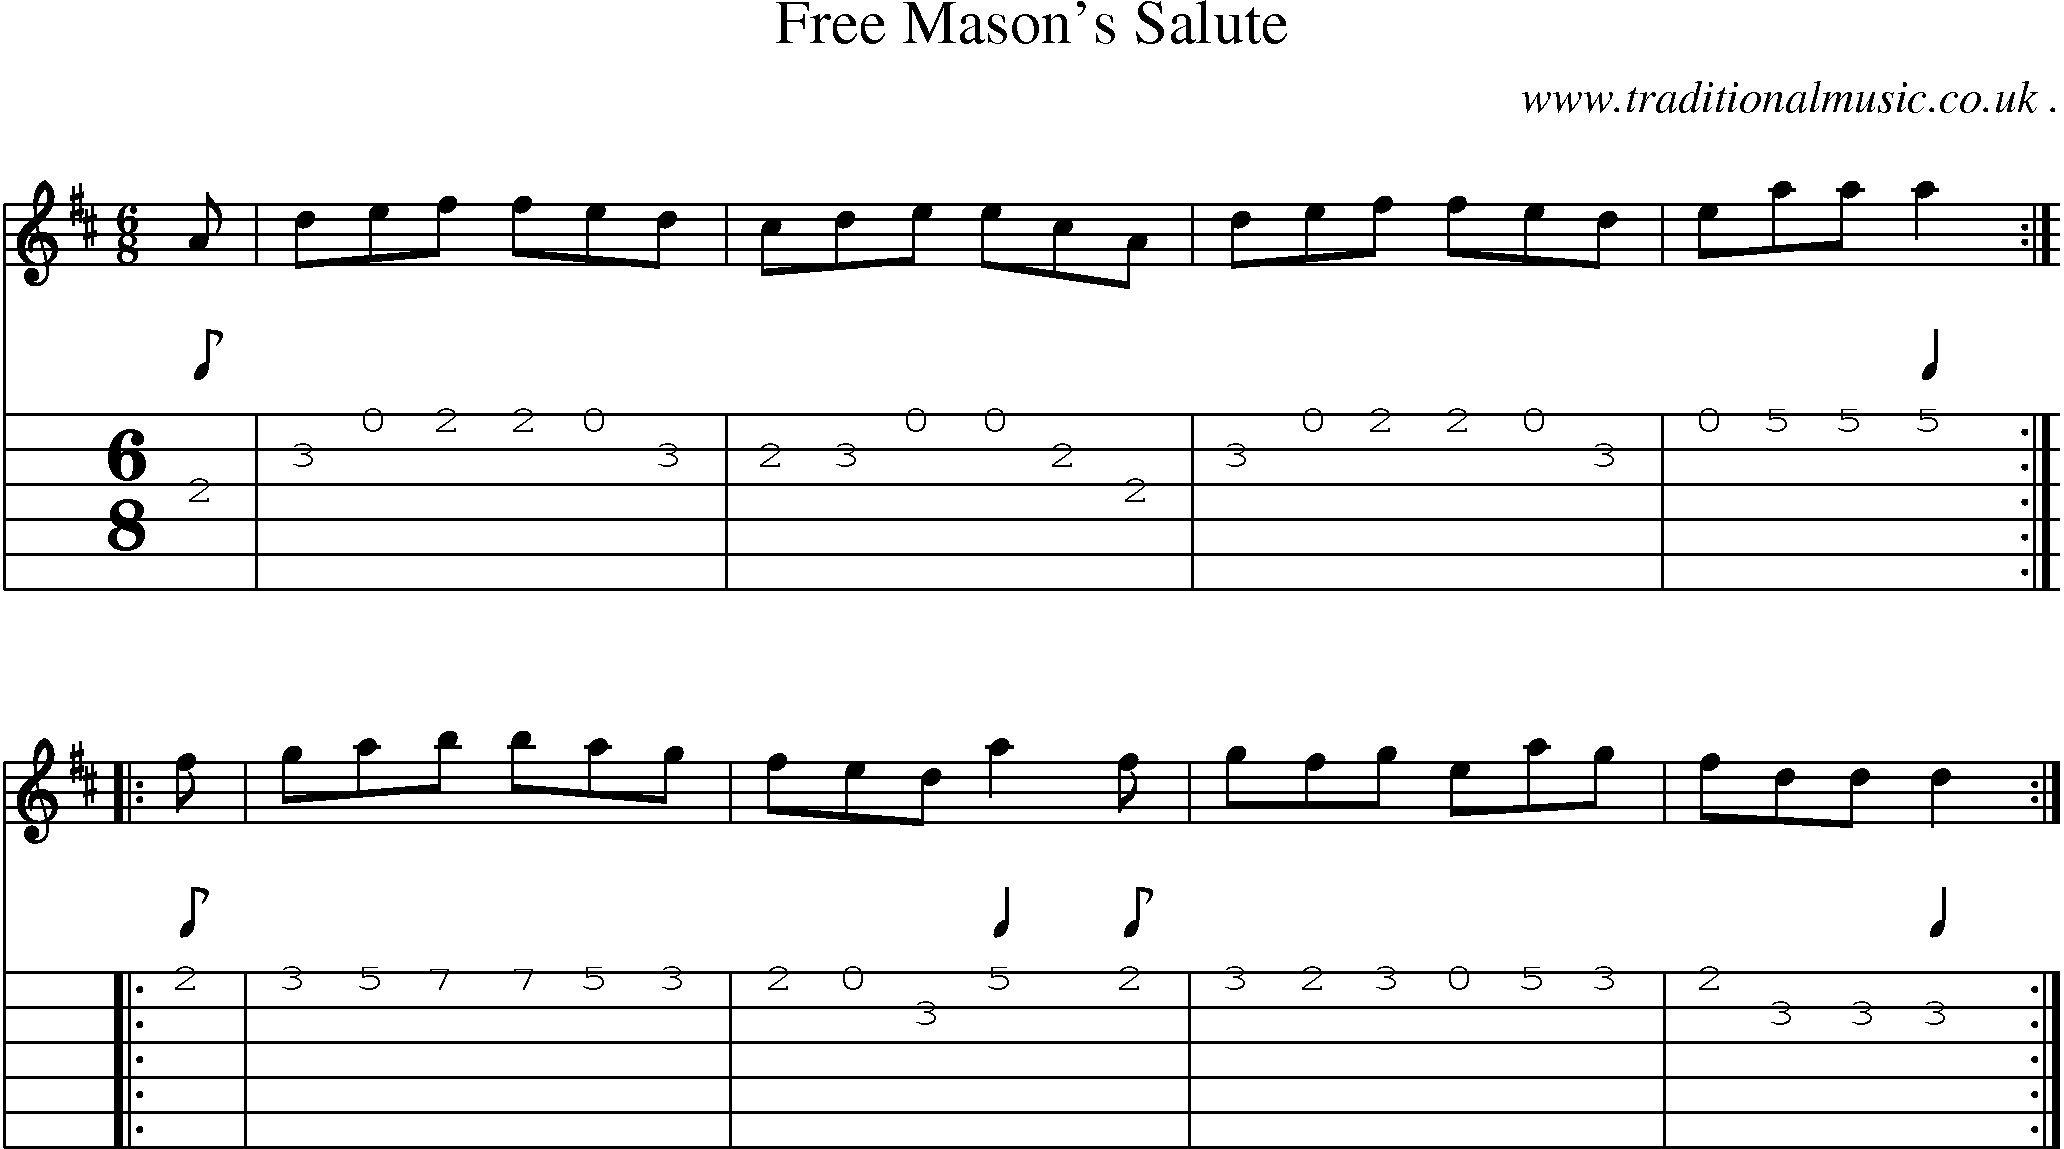 Sheet-Music and Guitar Tabs for Free Masons Salute